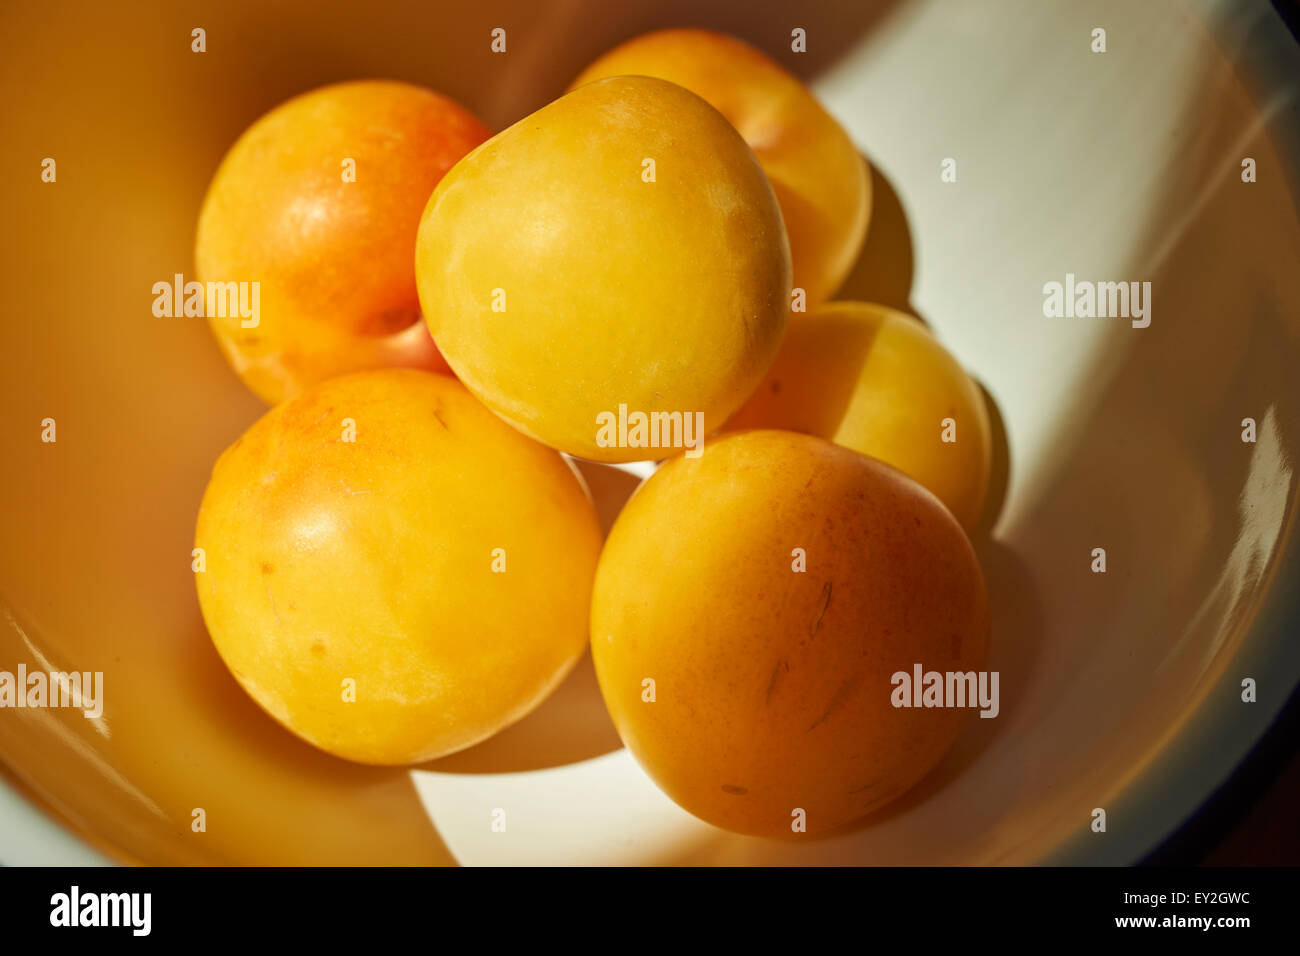 A bowl of yellow plums Stock Photo